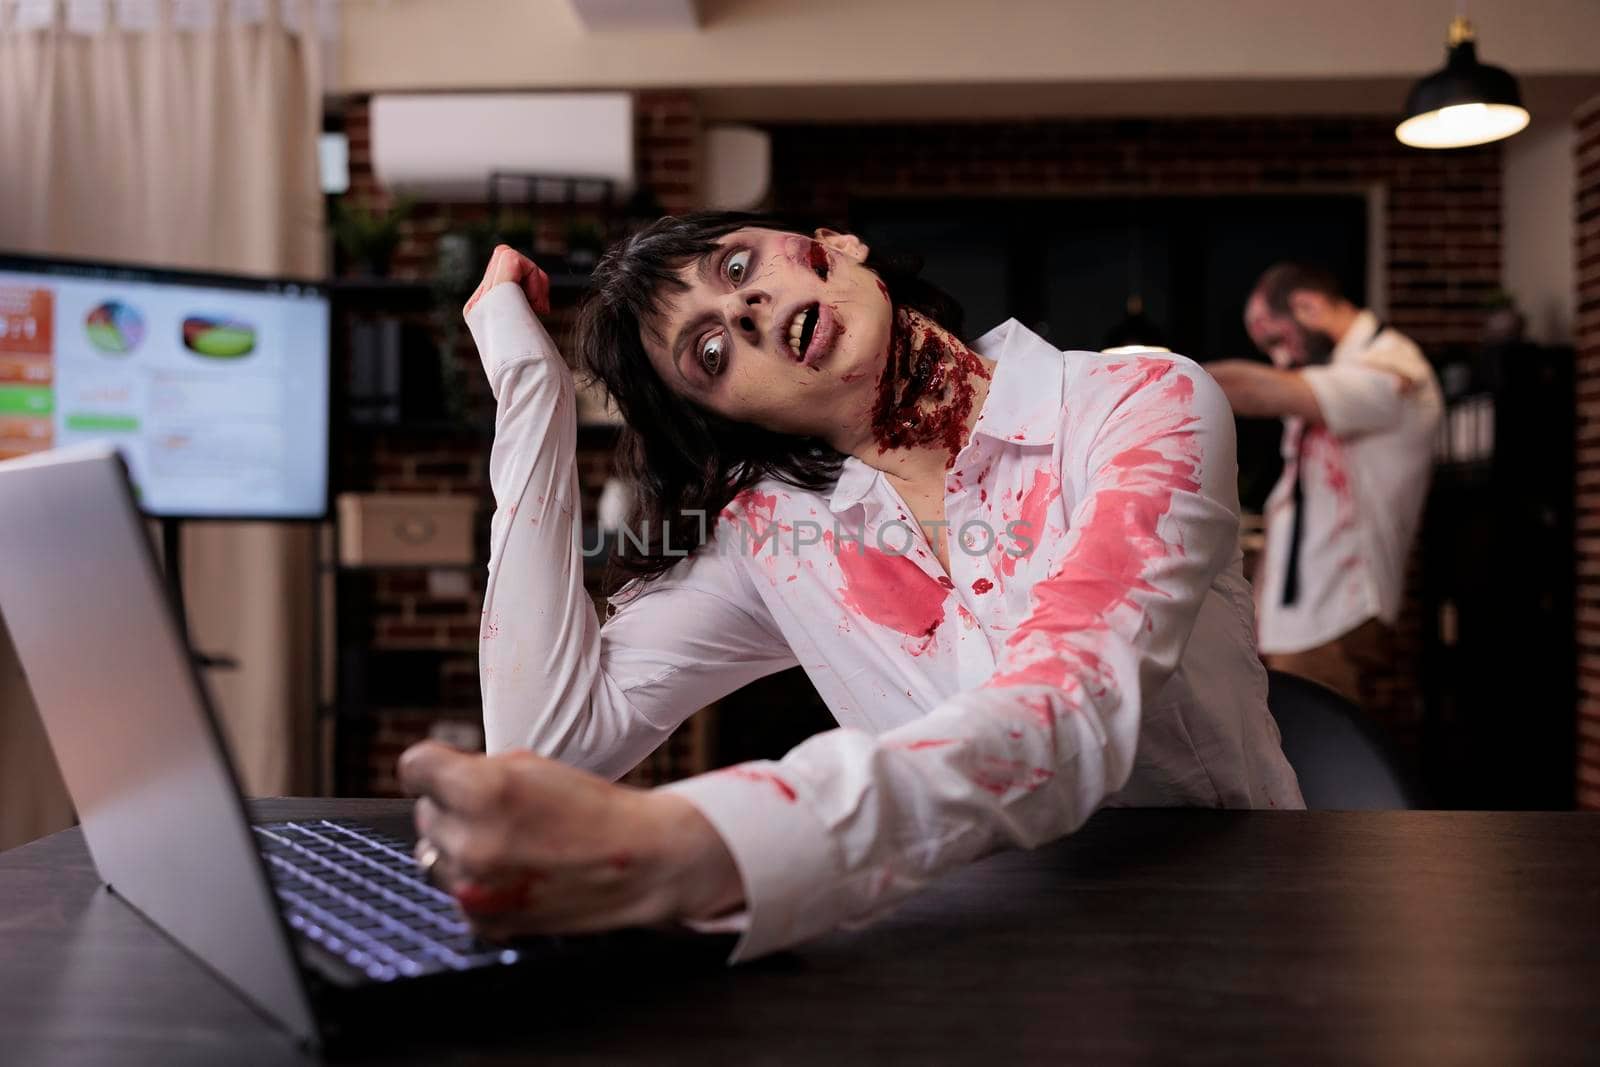 Horror cruel zombie using laptop at desk, undead corpse trying to work on computer in startup office. Creepy aggressive brain eating monster looking terrifying and horrible, sinister danger.